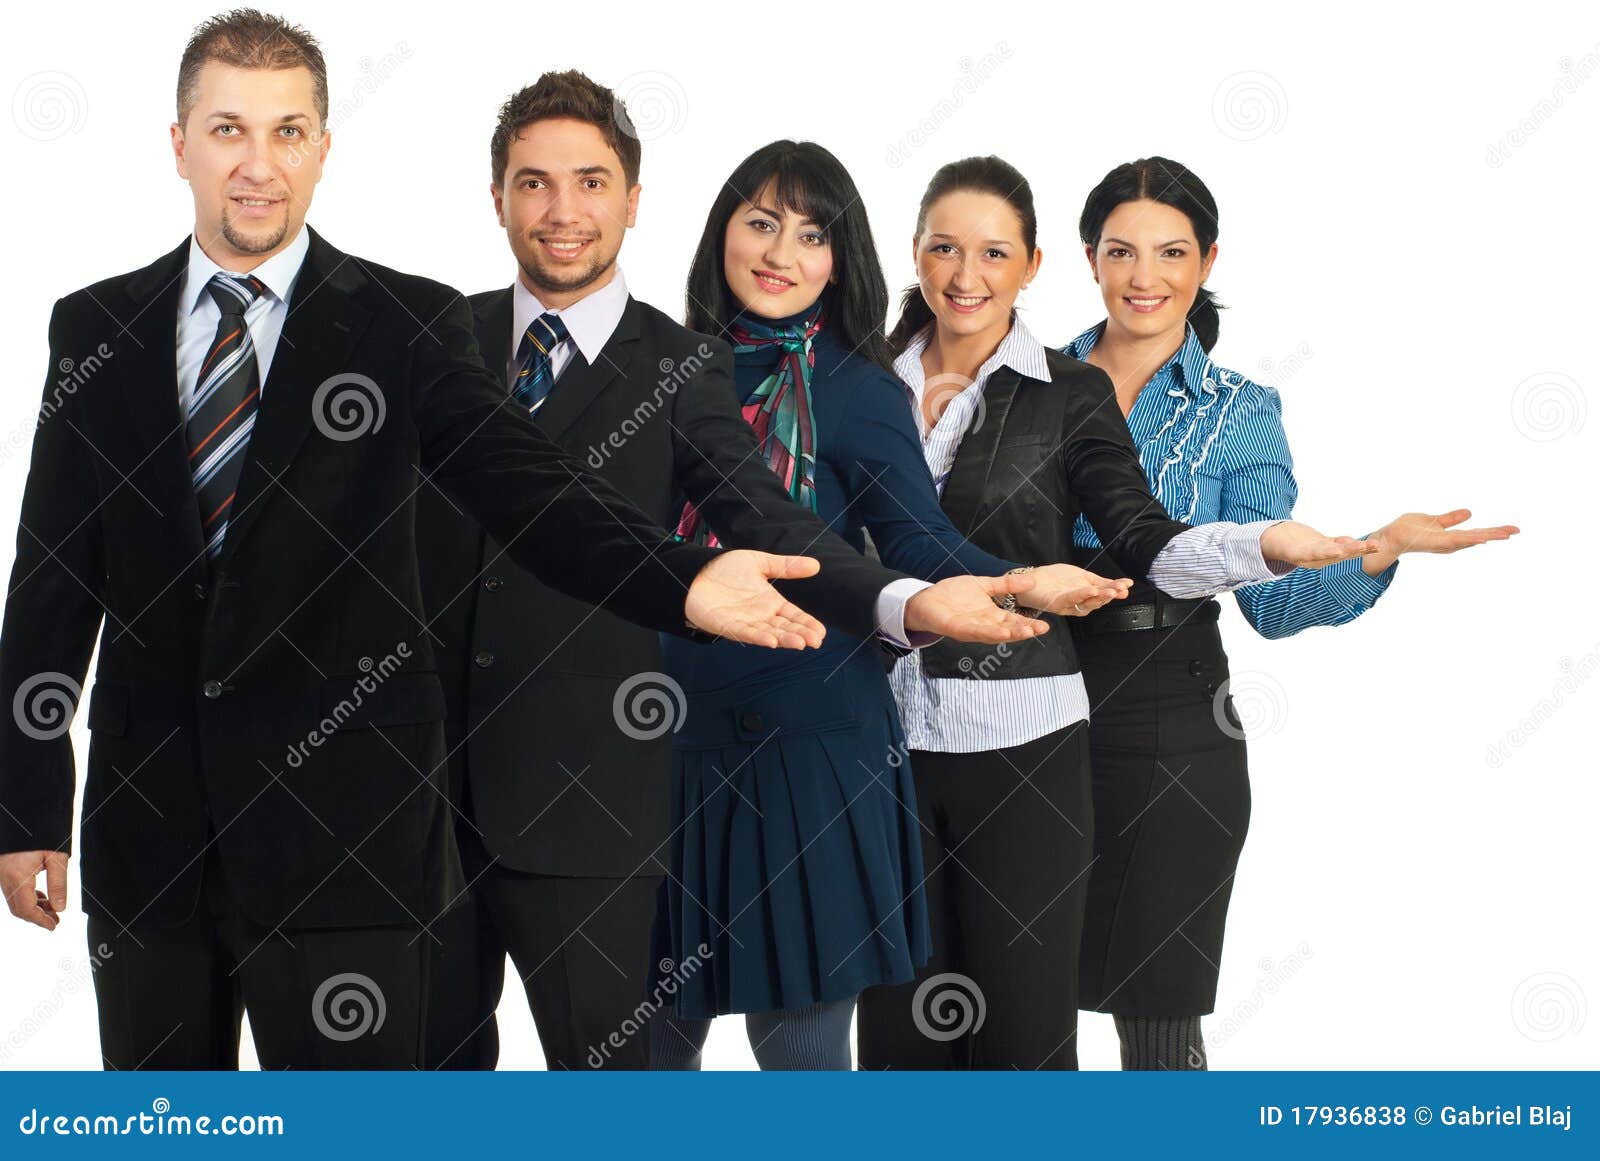 group of business people welcoming